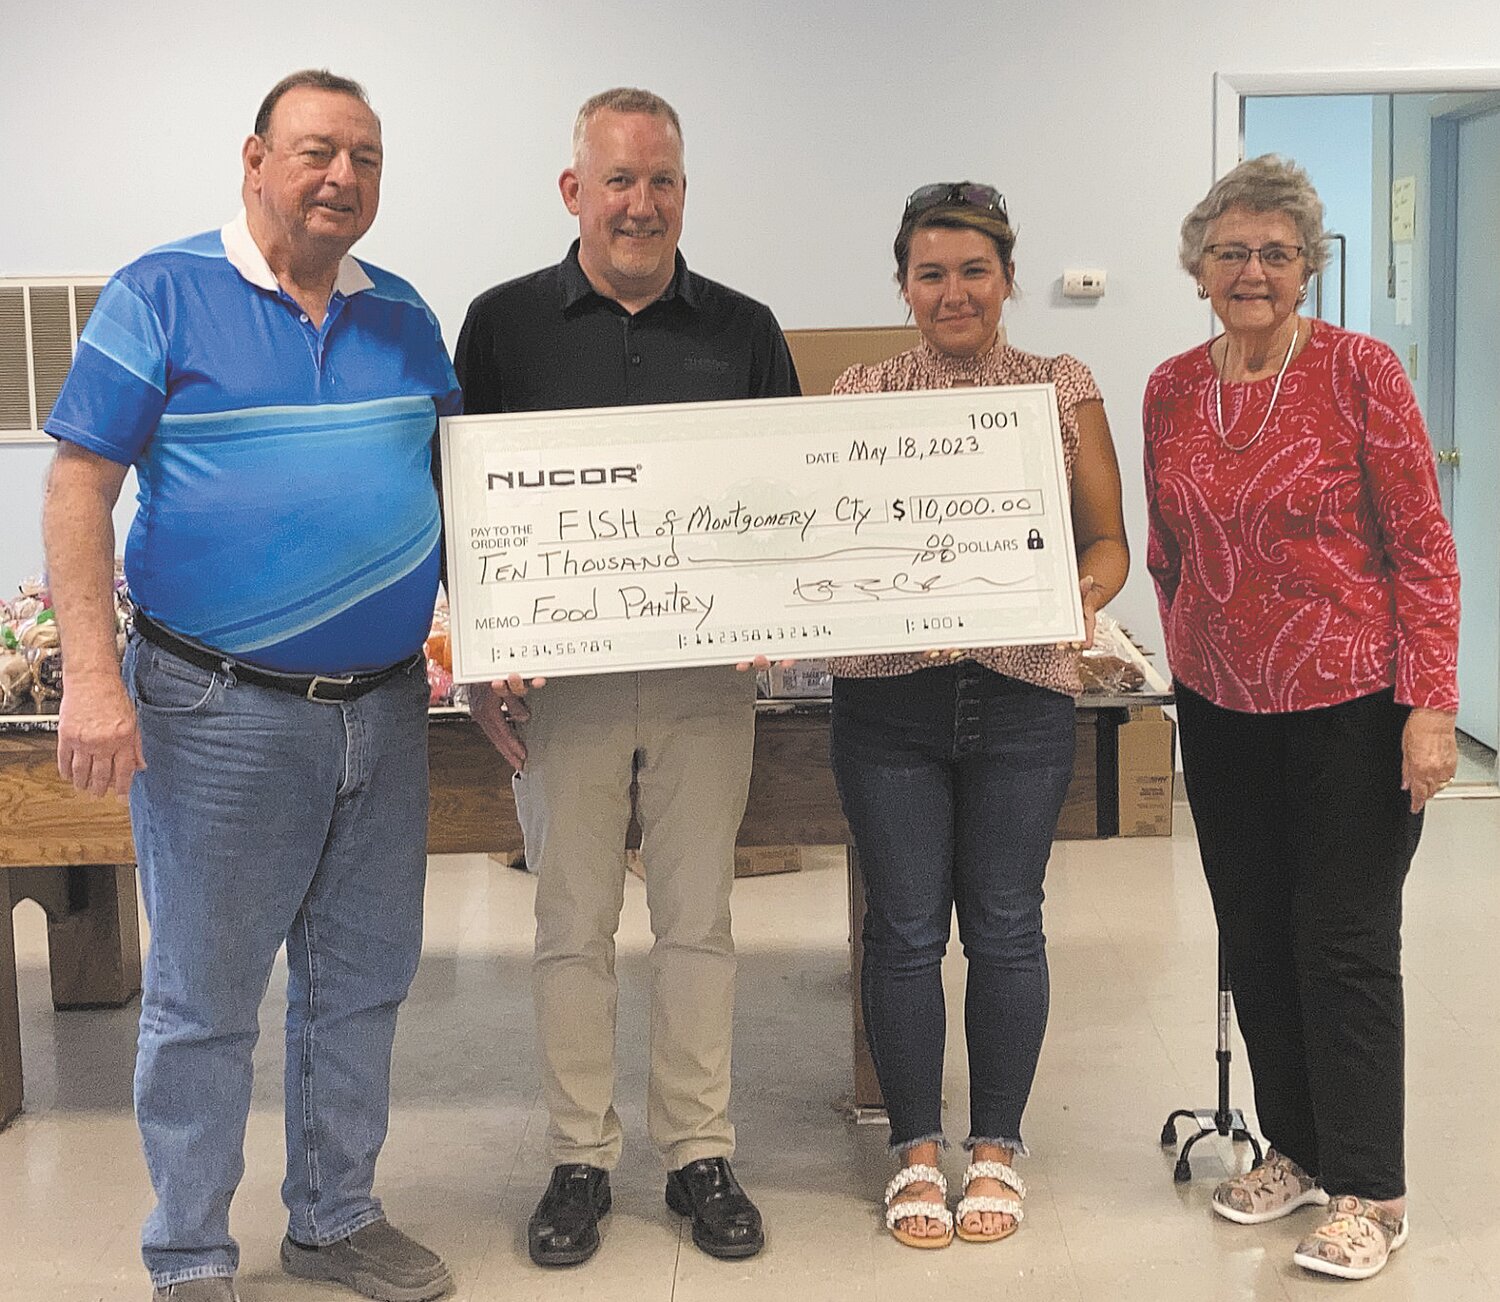 The FISH Food Pantry was the recipient of a generous corporate donation from Nucor Steel. Representatives of Nucor, Haley Kunkel and Phil Littell, presented FISH board members with a check for $10,000. Pictured, from left, are FISH treasurer Bernie Williams, Littell, Kunkel and FISH president Linda Cherry.